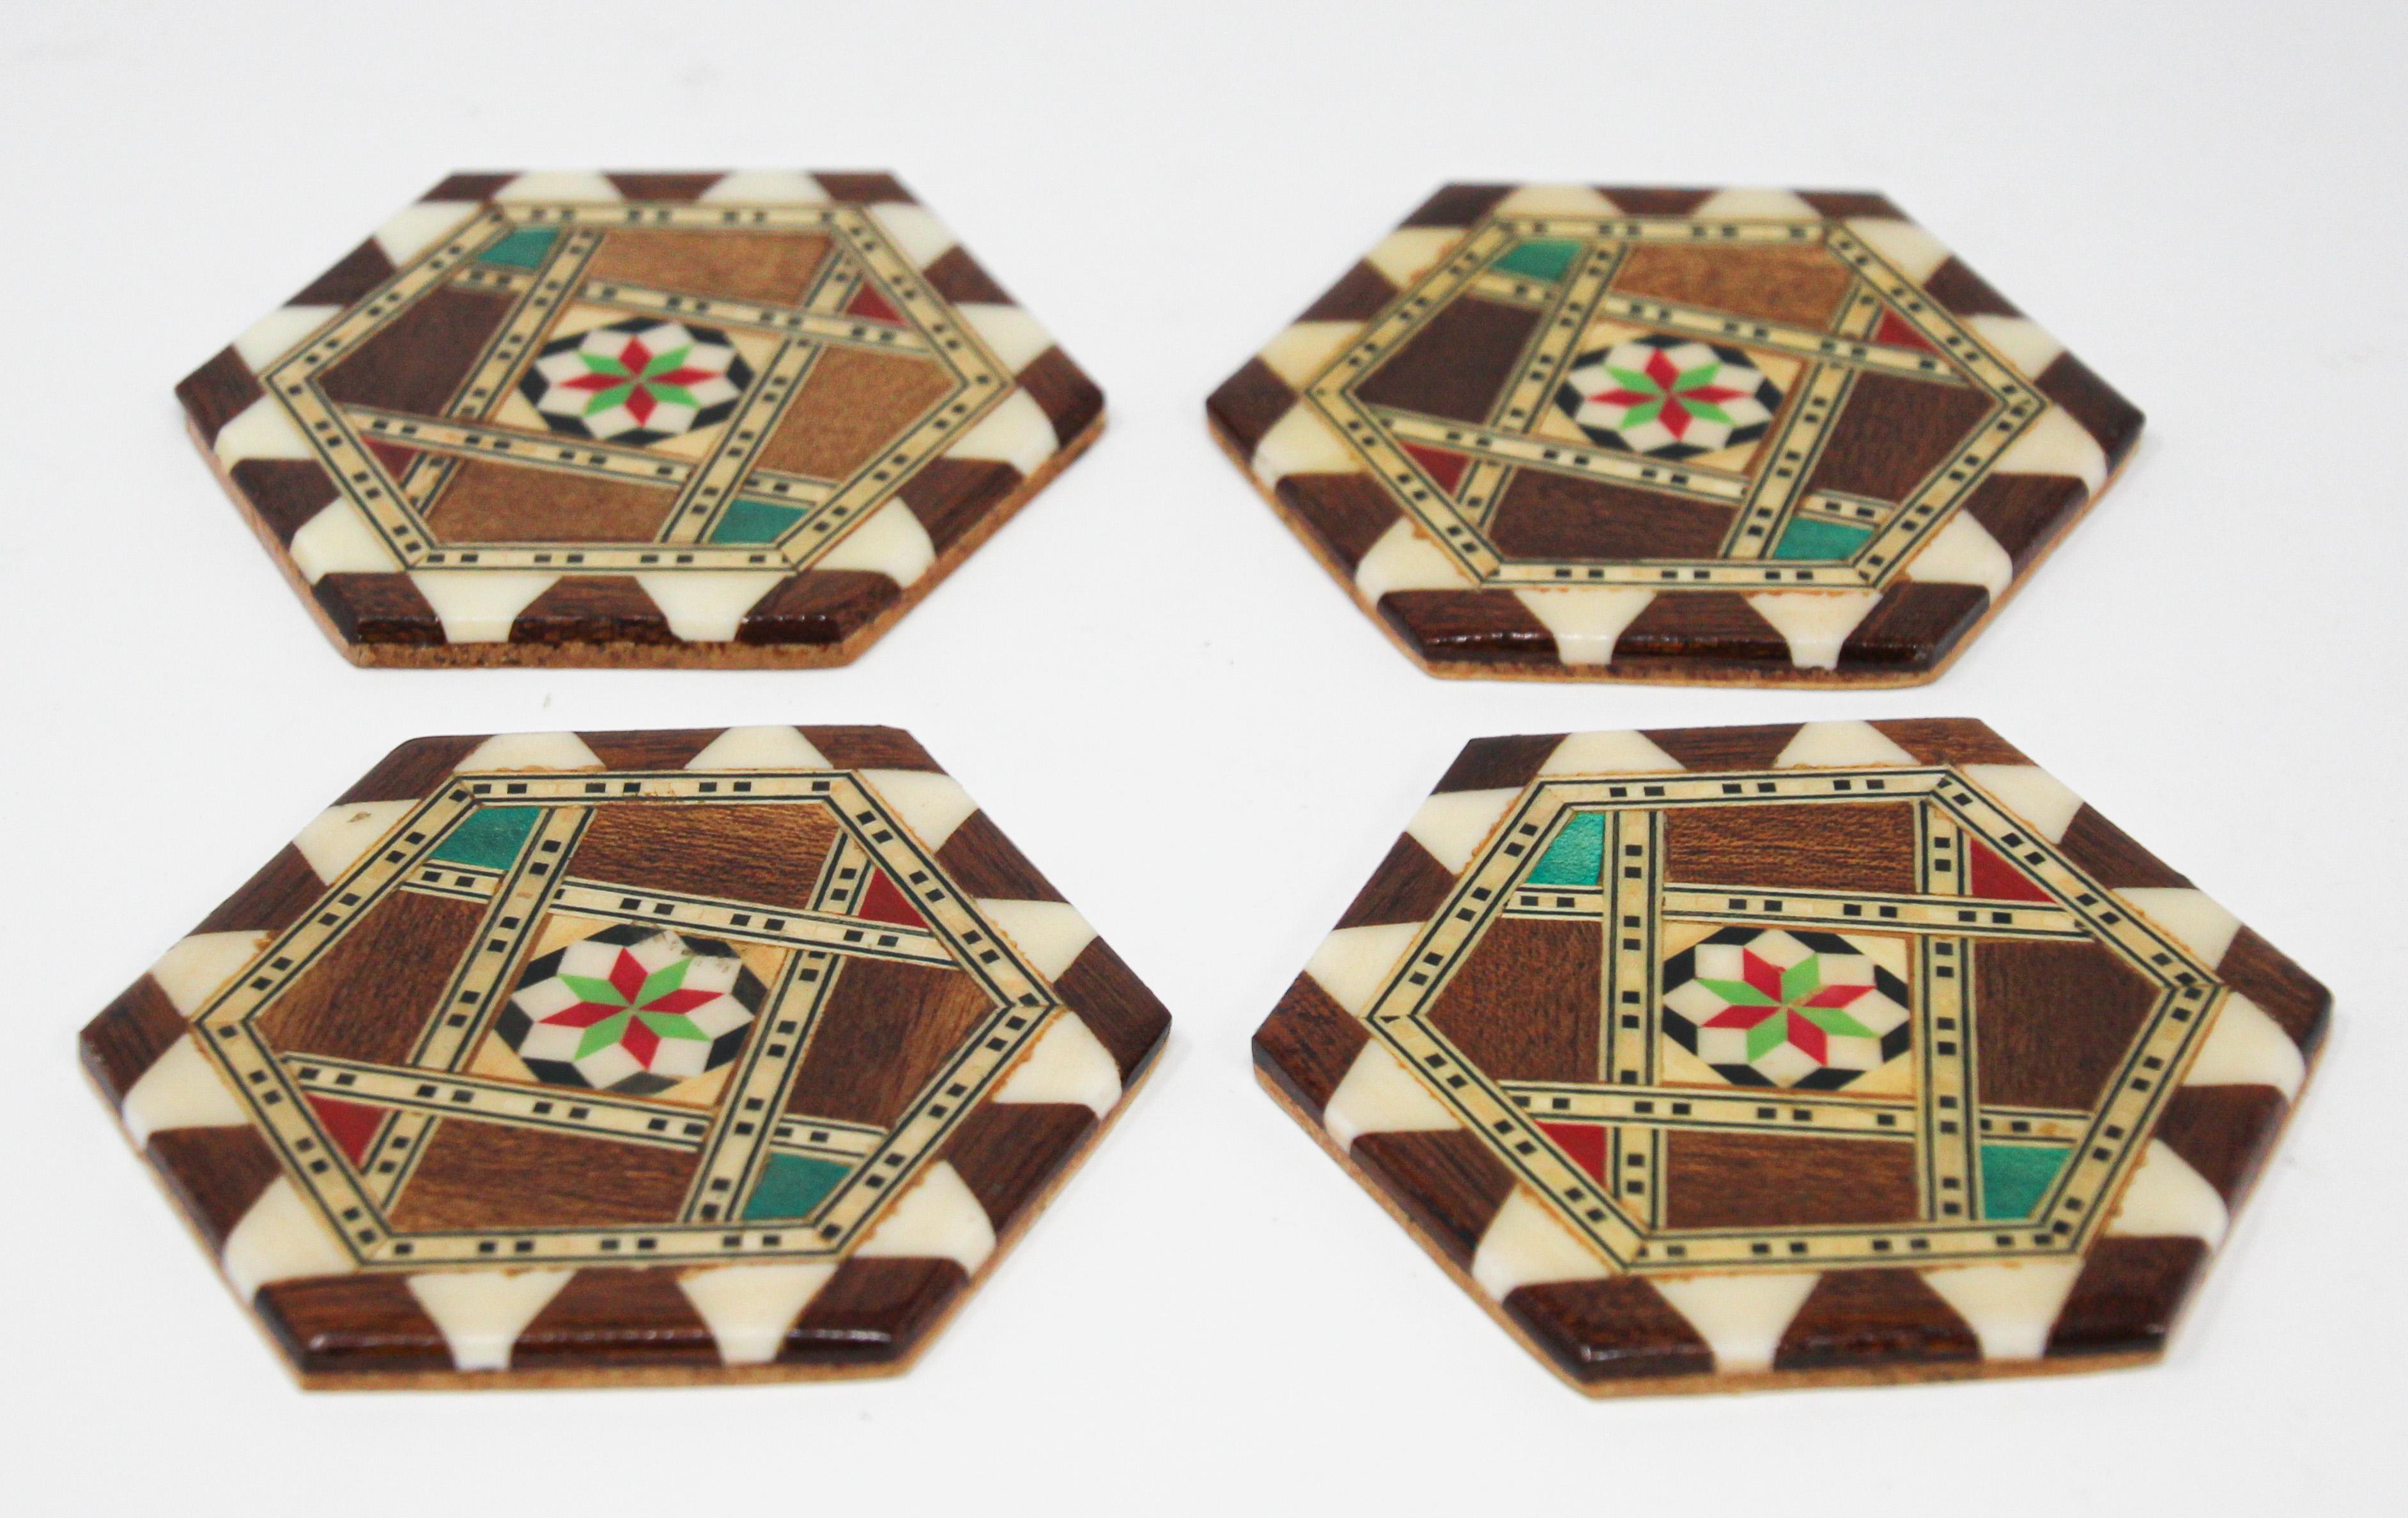 Syrian inlaid marquetry mosaic octagonal set of four cocktail coasters. 
The amazing craftsmanship in intricate marquetry fruitwood with mosaic Moorish geometric pattern and mother-of-pearl inlay makes it a true work of art. Handcrafted in the